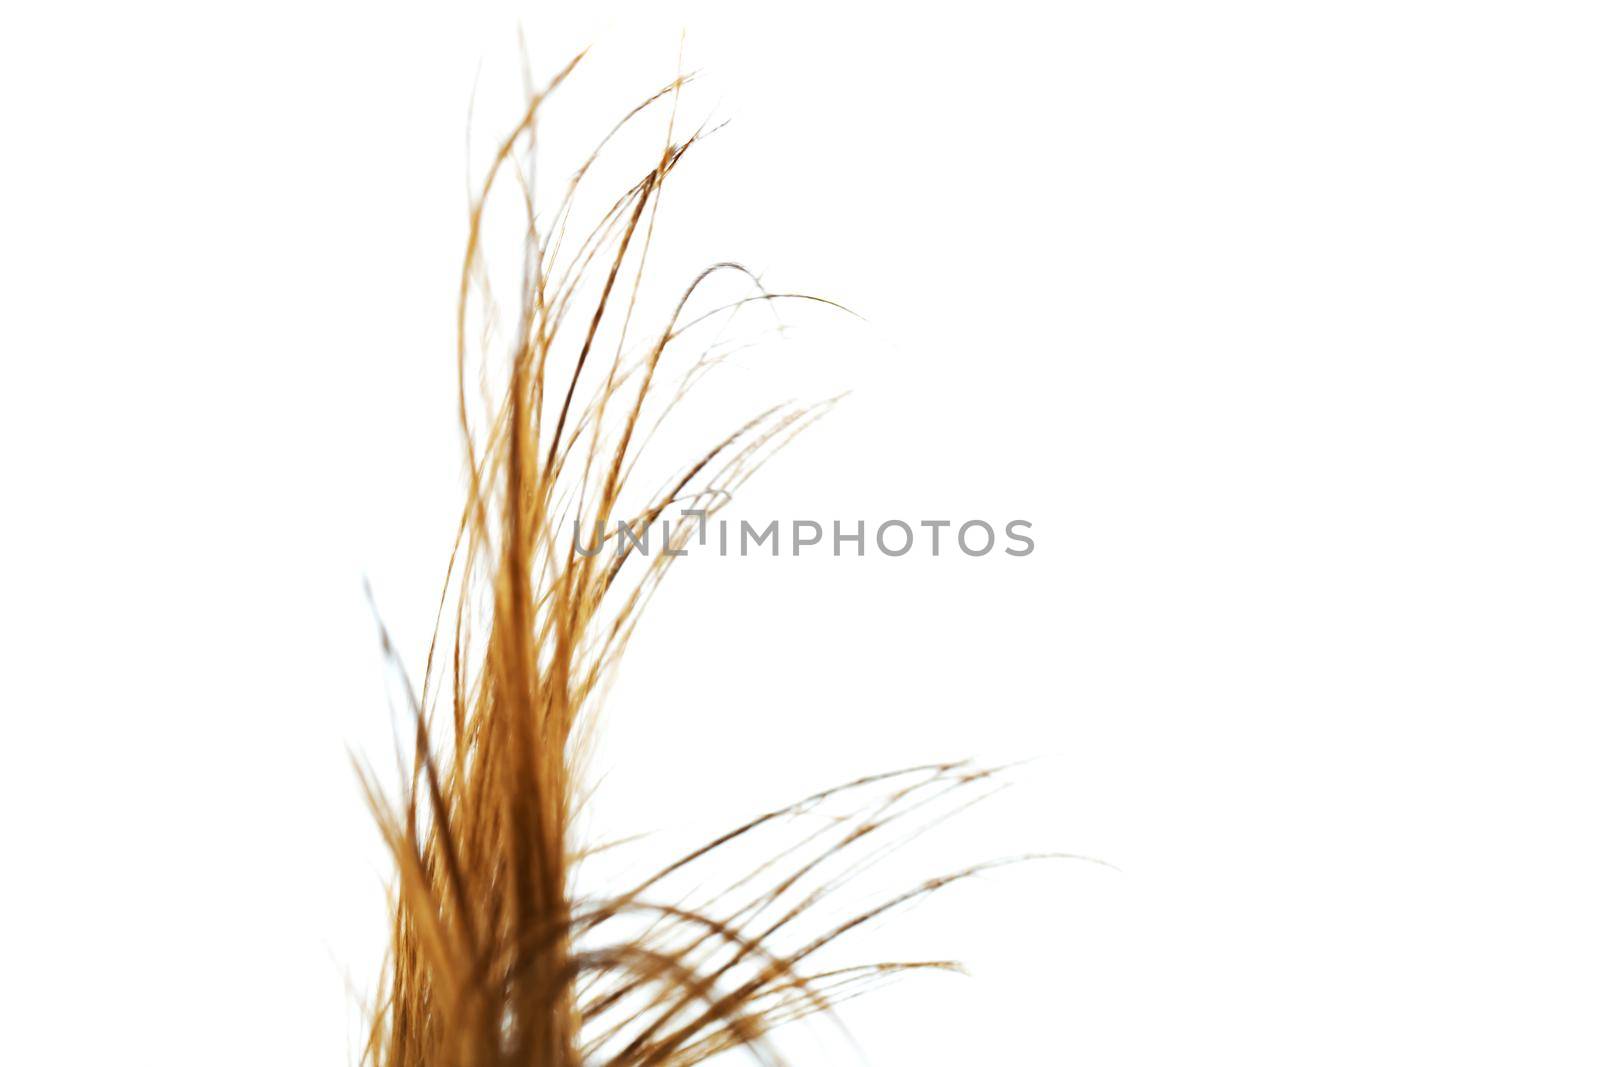 Windy hair. Abstract close up hairs on white background.